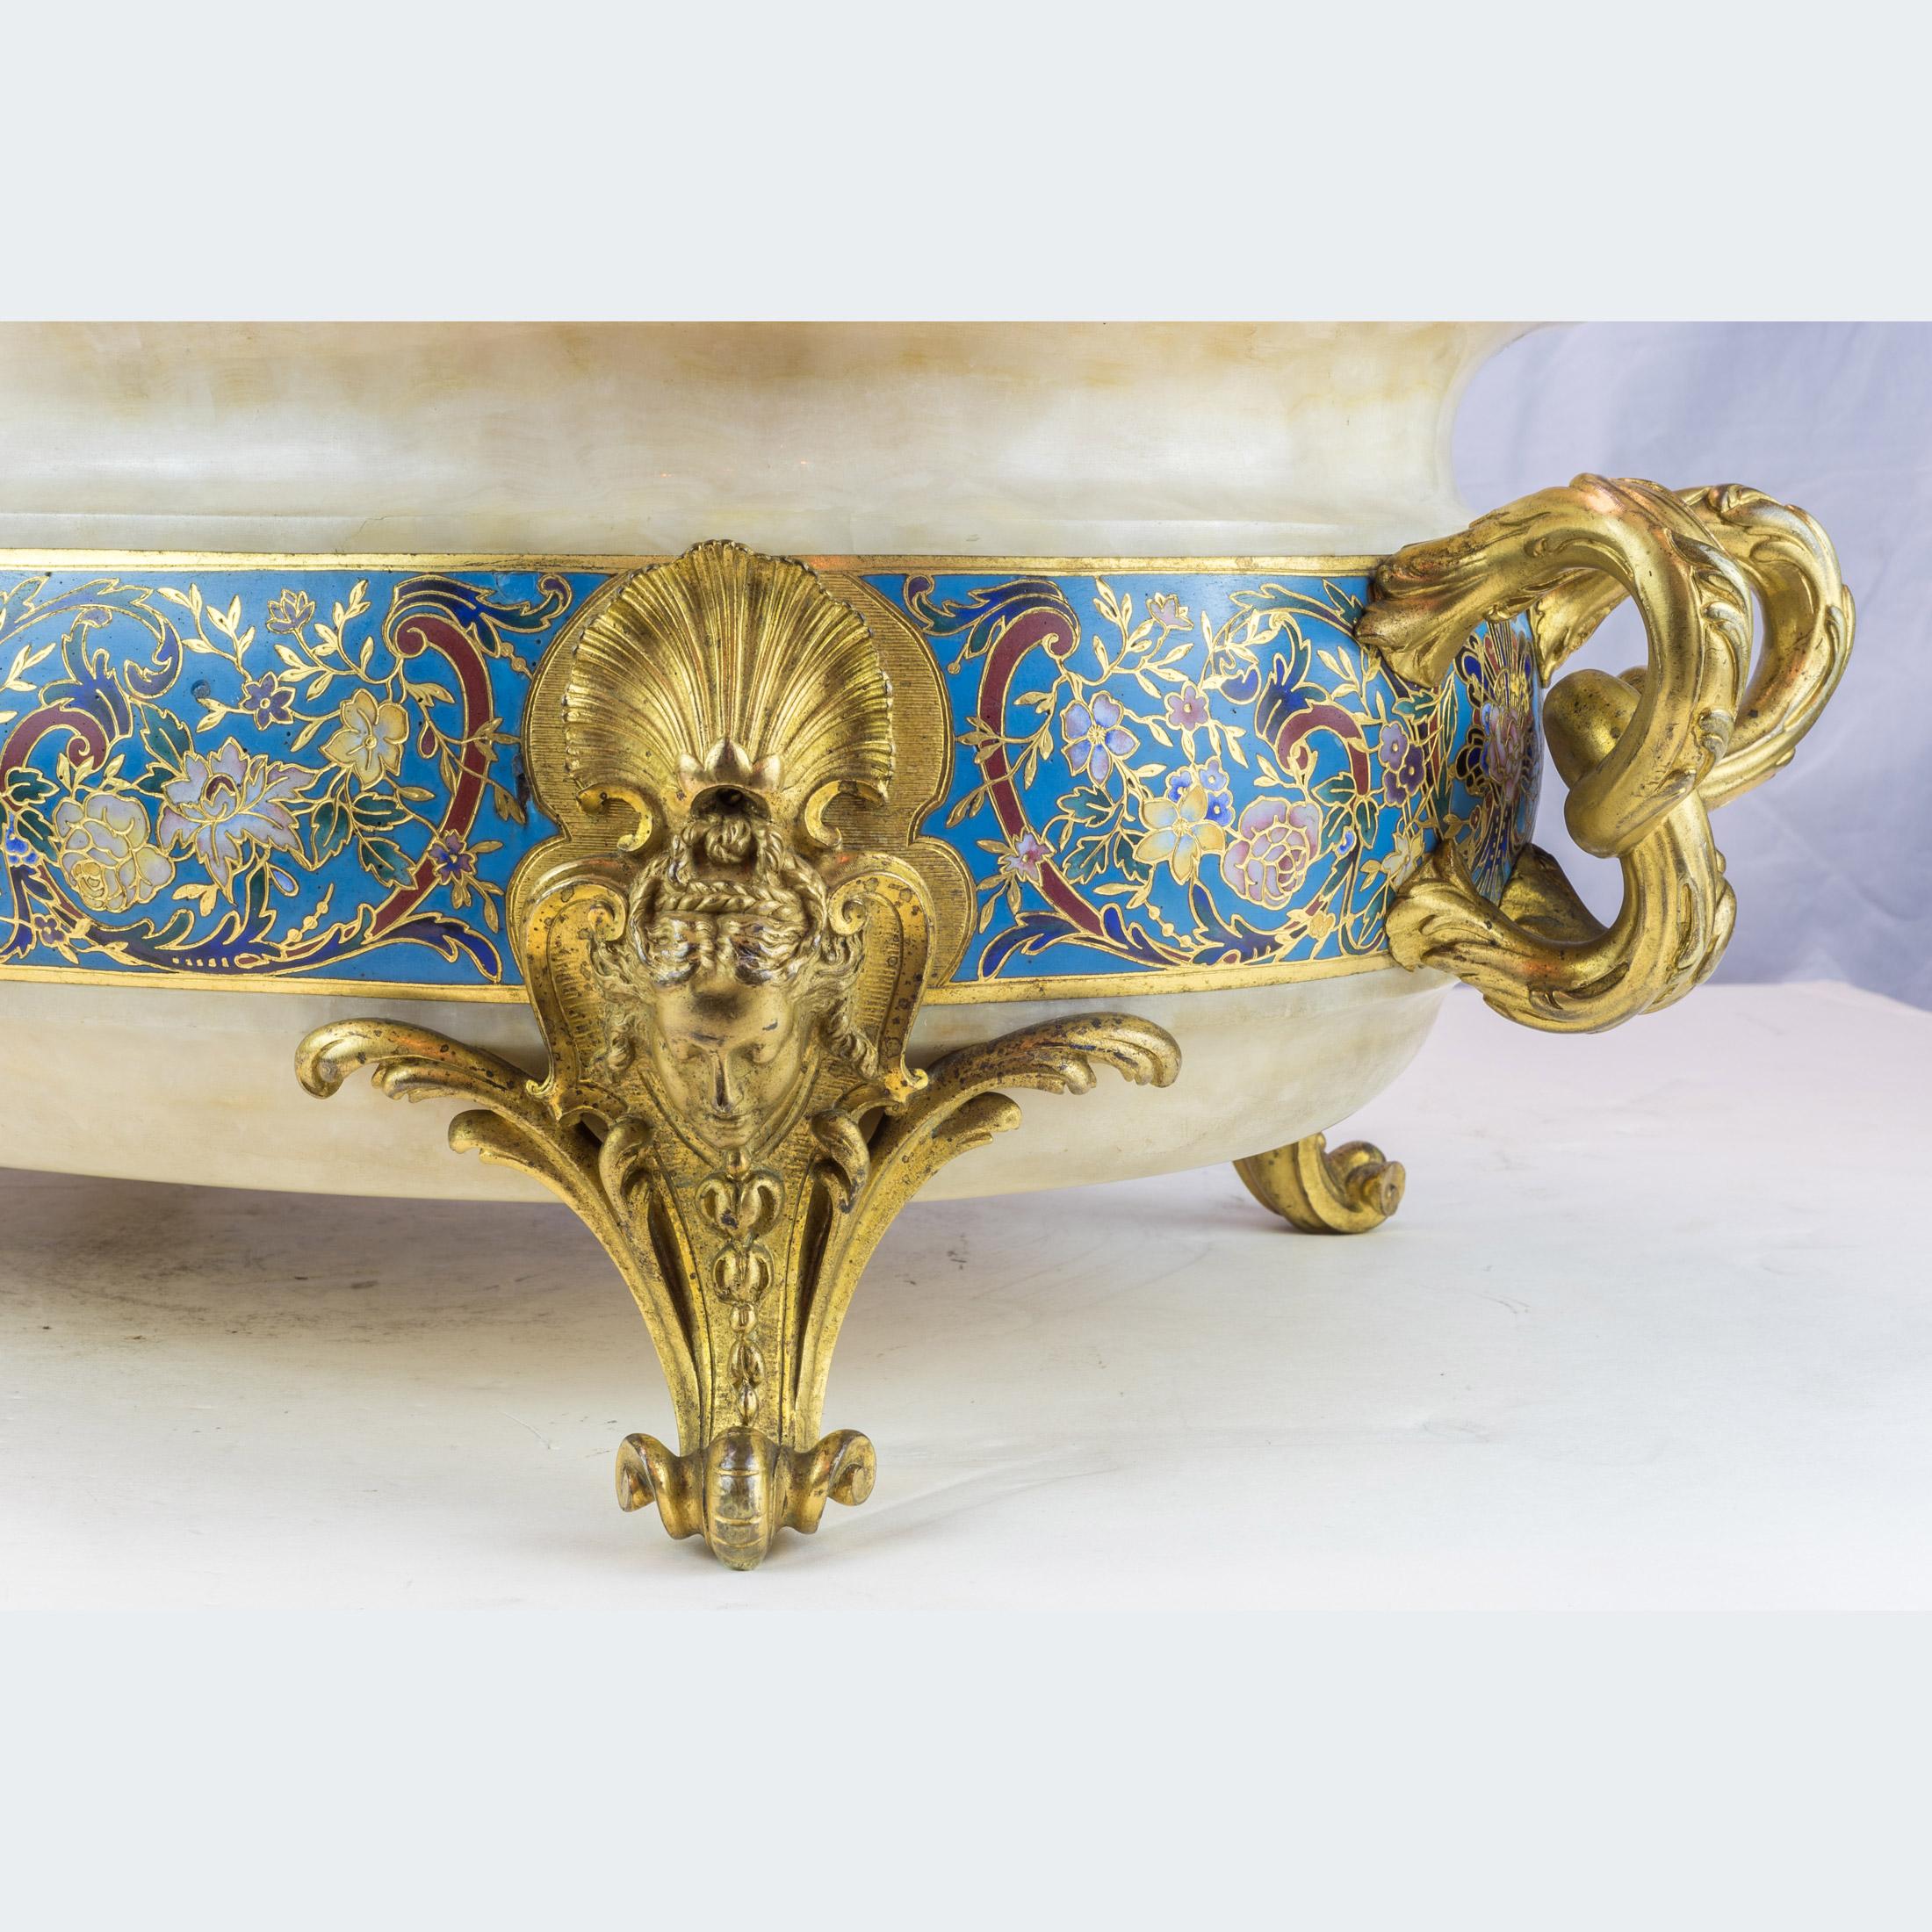 Ormolu-Mounted and Champlevé Enamel Decorated Onyx Jardinière by Barbedienne For Sale 1